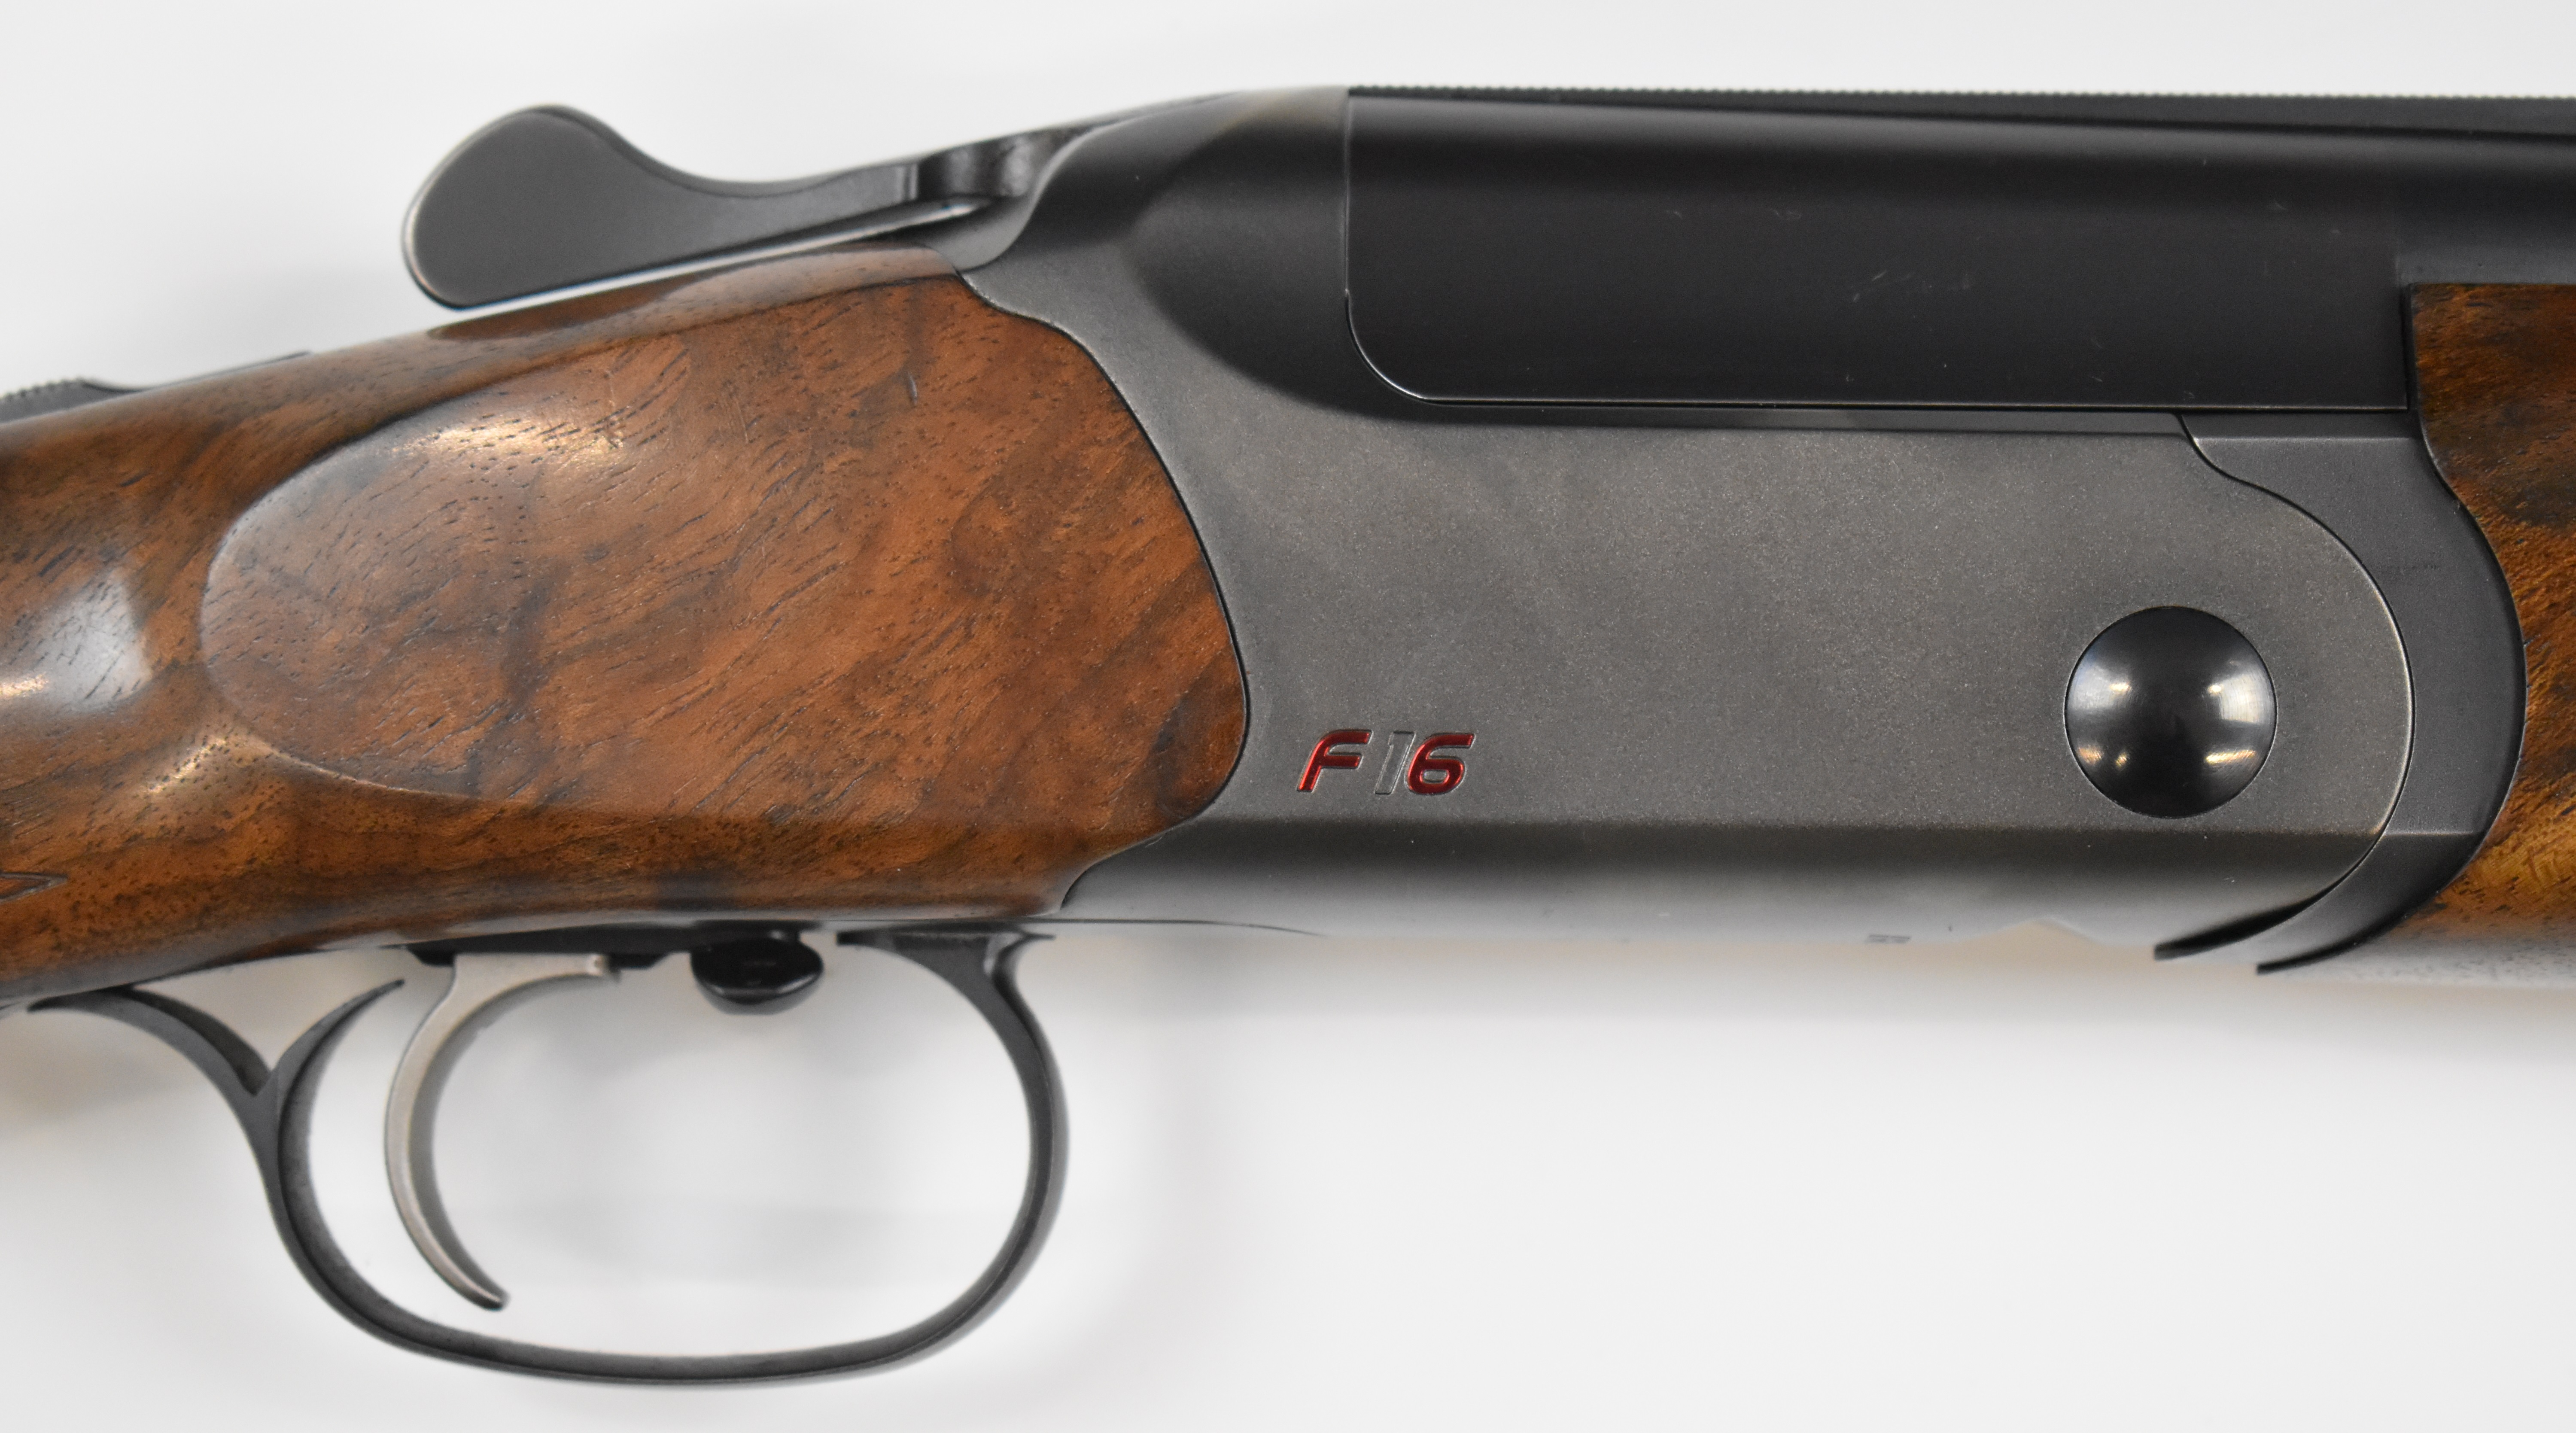 Blaser F16 12 bore over under ejector shotgun with named locks and underside, chequered semi- - Image 17 of 22